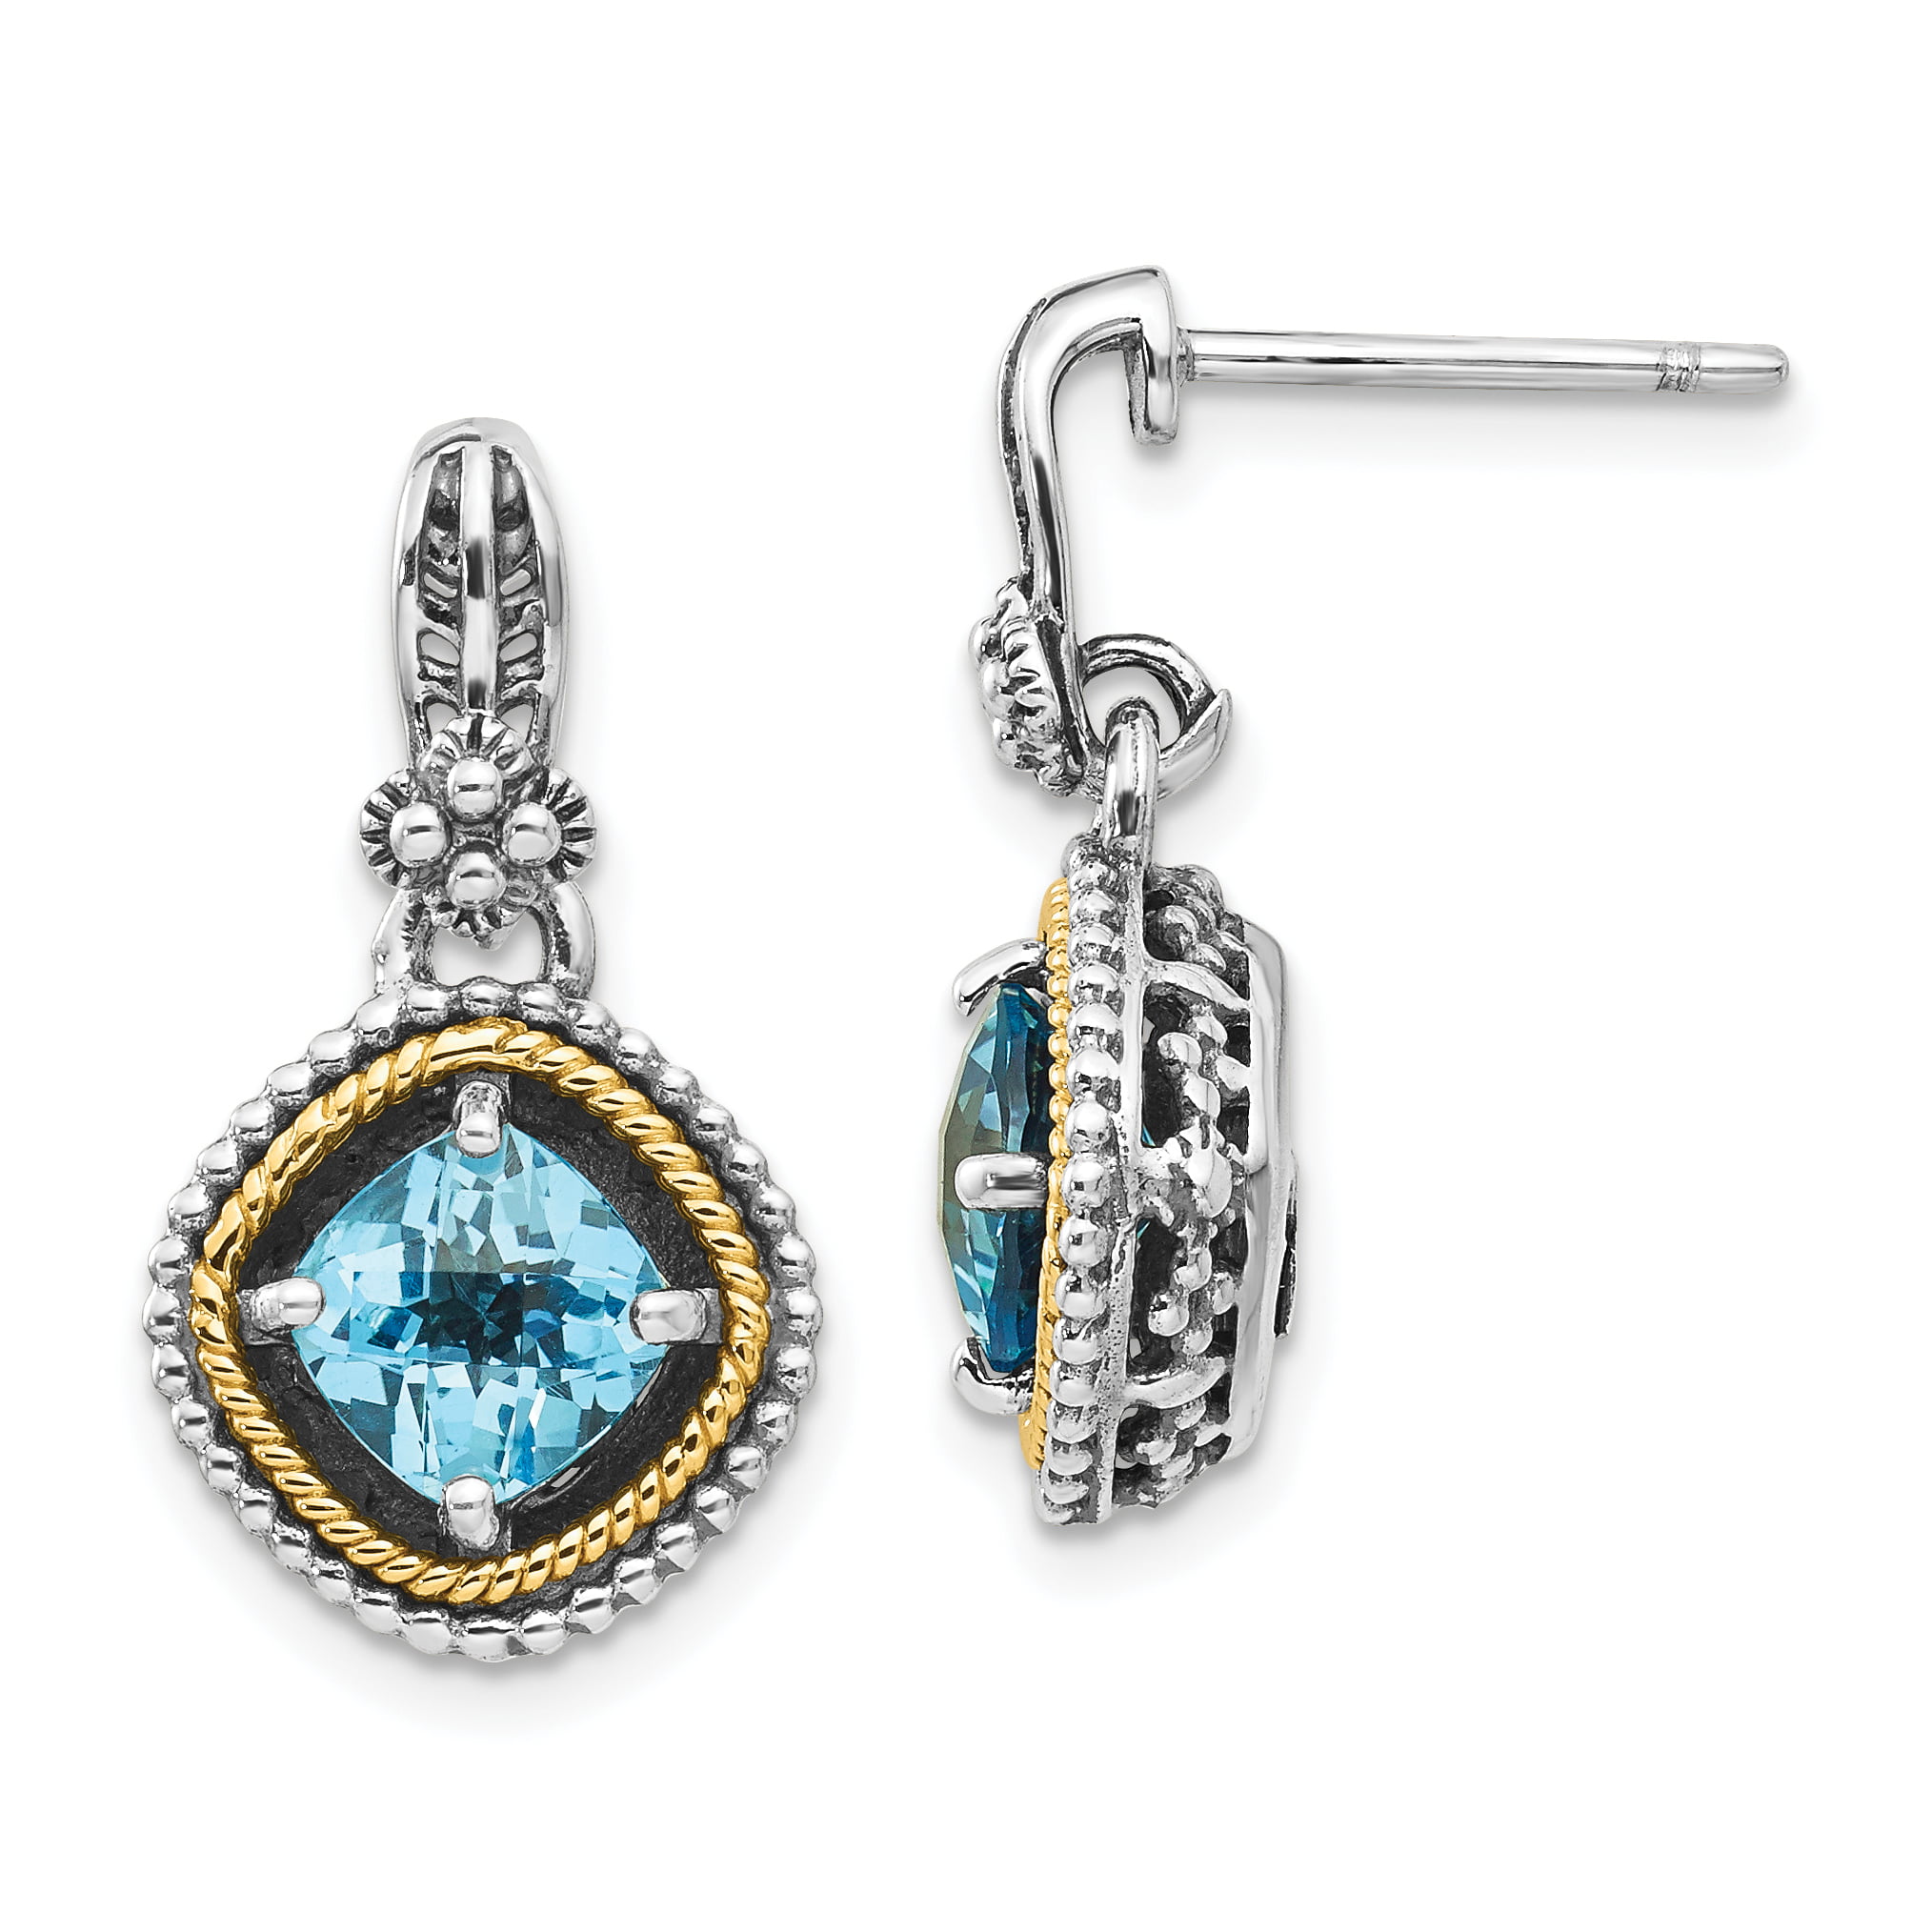 27 MM Shey Couture 925 Sterling Silver with Gold-Tone Accent Blue Topaz Post Dangle Stud Earrings 